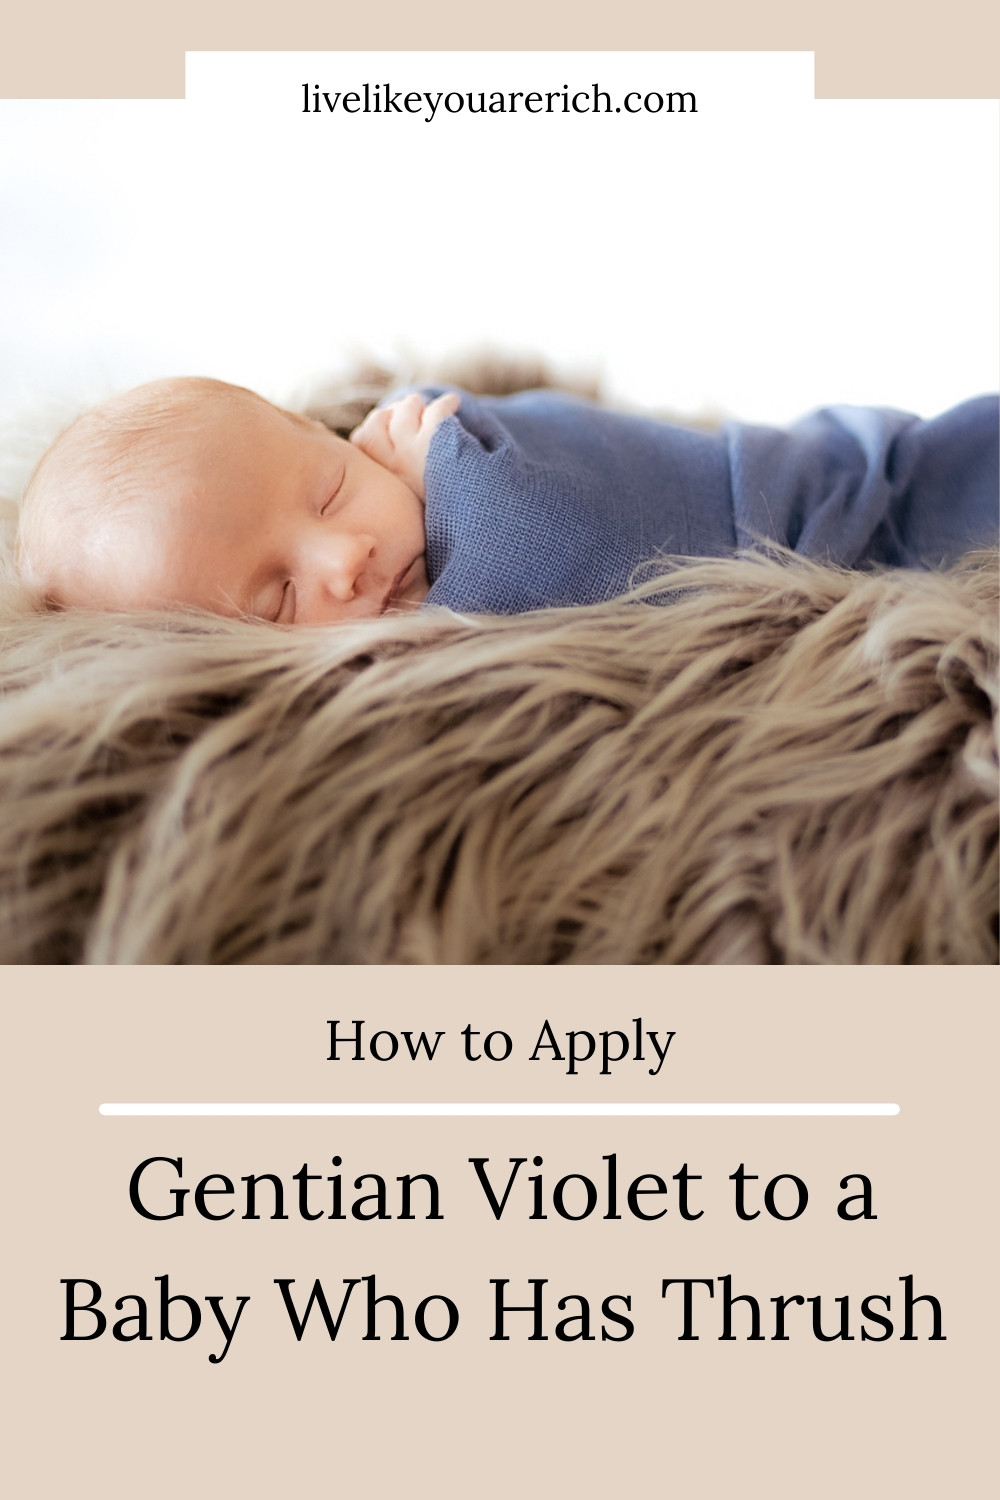 This is How to Apply Gentian Violet to a Baby Who Has Thrush without making a mess. Thrush is a white film on the mouth that grows when bacteria is left to thrive. It is very common for babies and breastfeeding moms. 